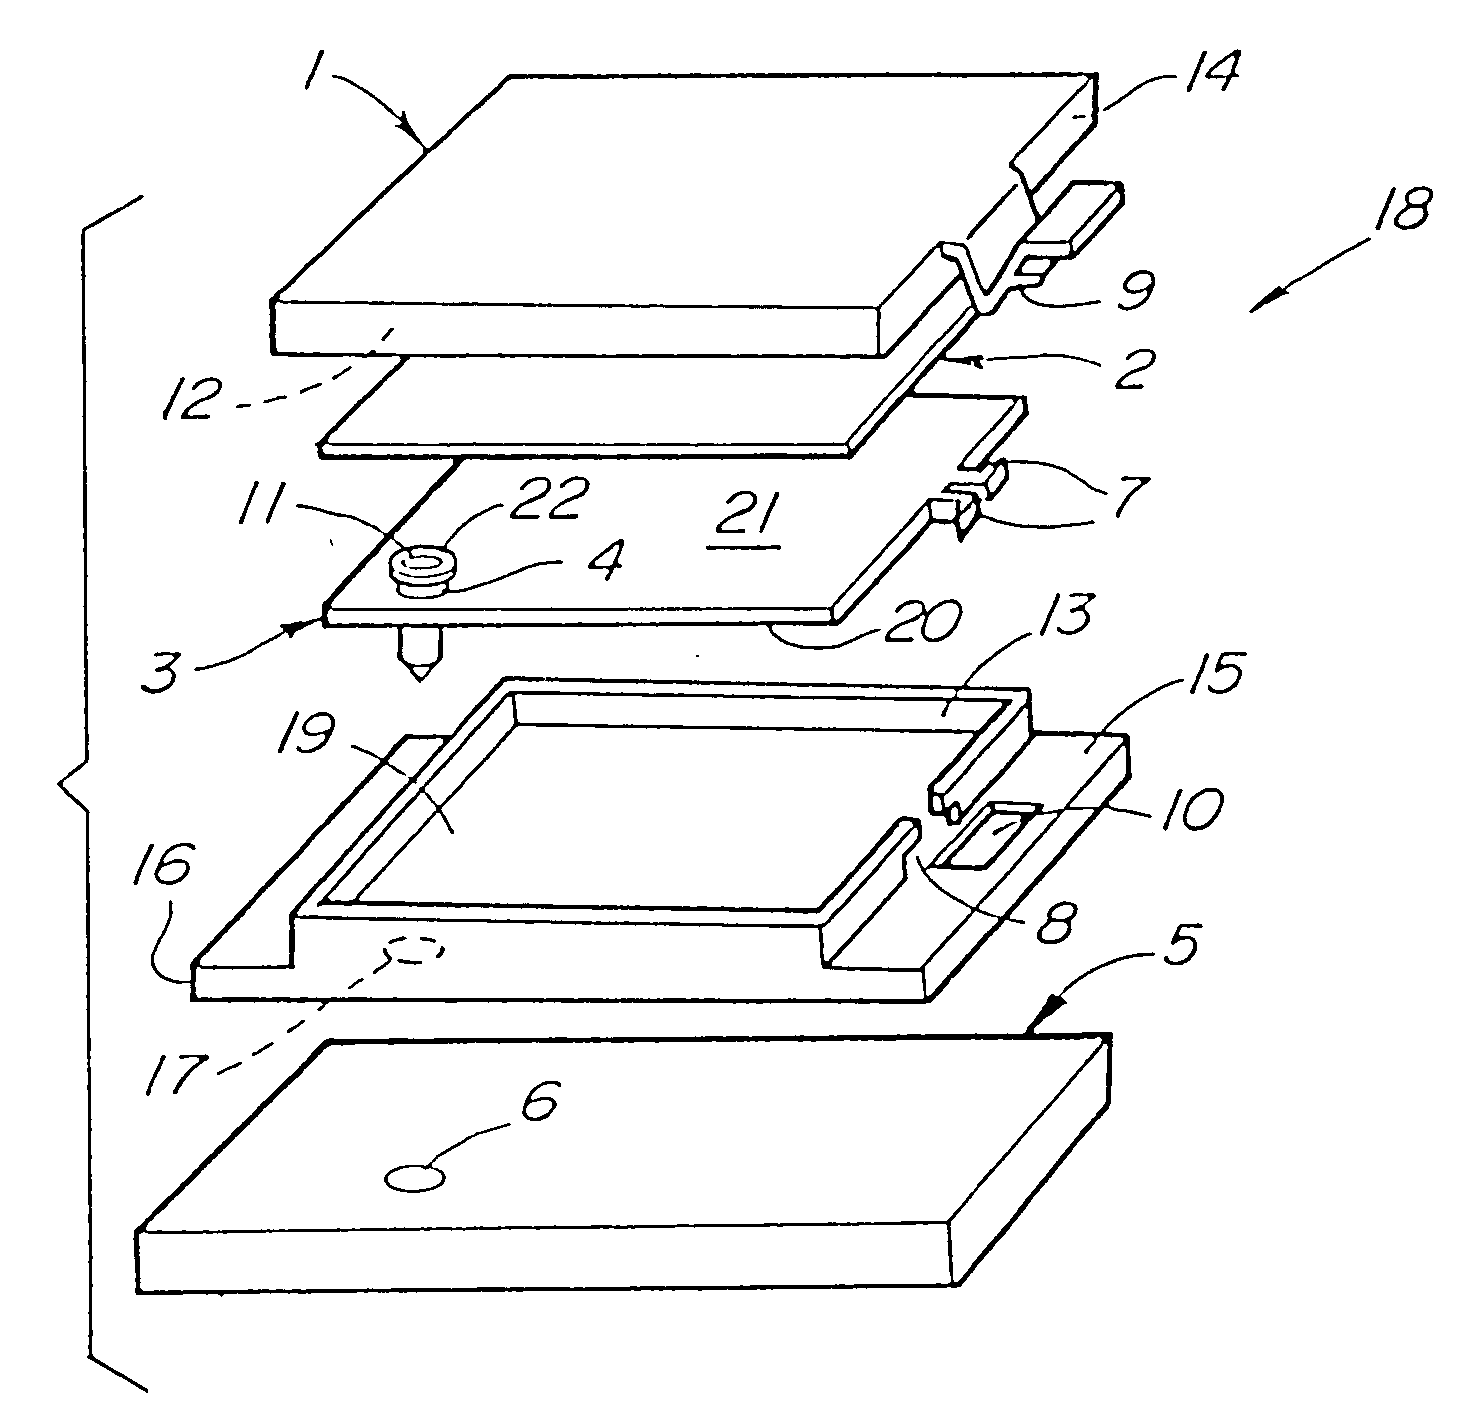 Method and apparatus for preventing cross-contamination of multi-well test plates